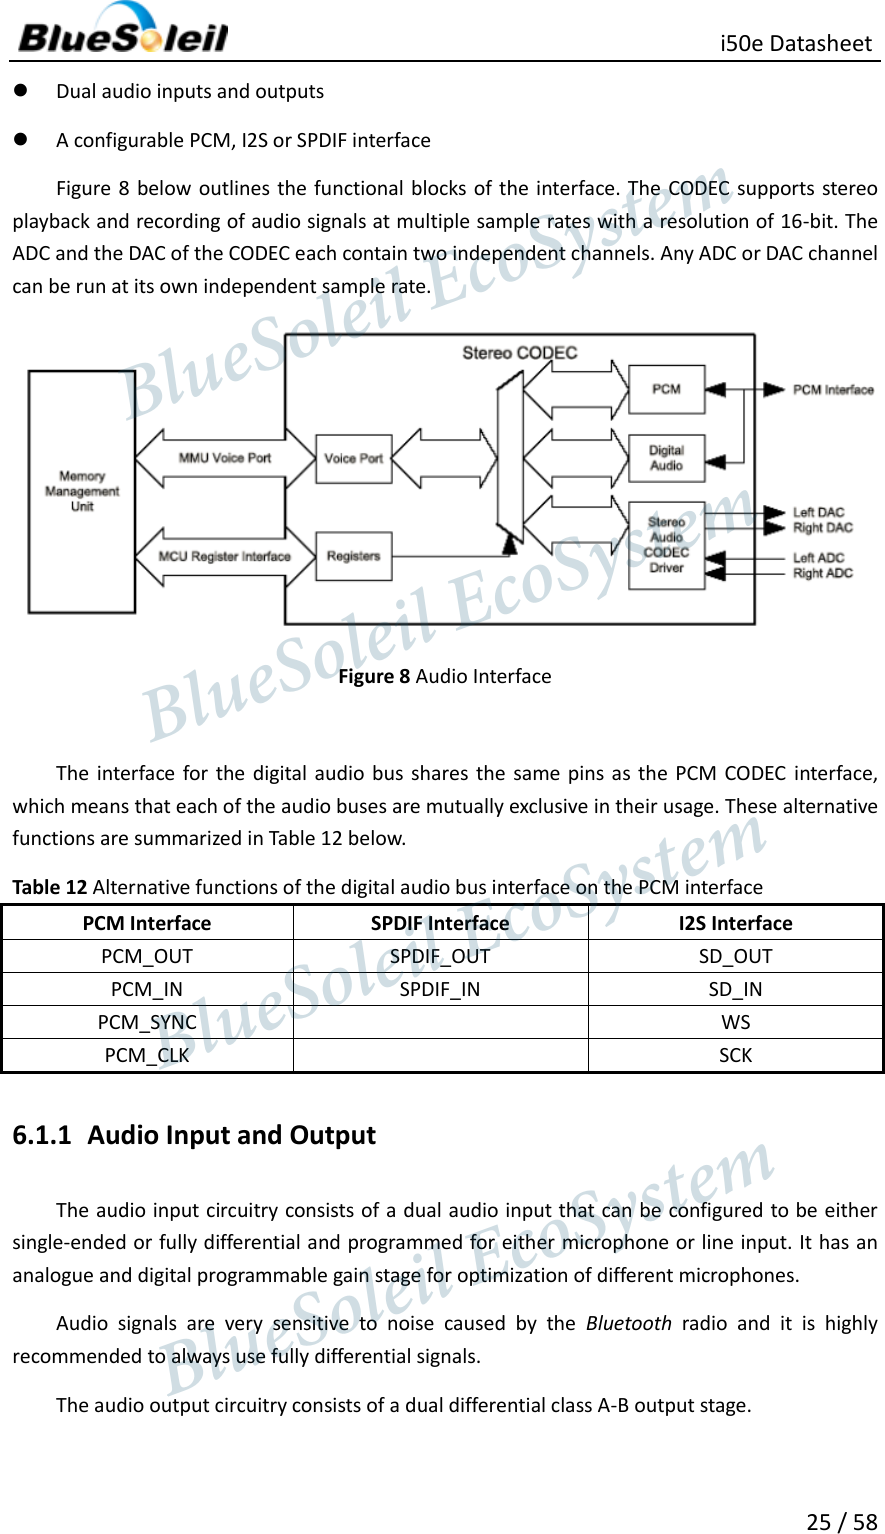                                                   i50e Datasheet 25 / 58  Dual audio inputs and outputs  A configurable PCM, I2S or SPDIF interface   Figure 8 below outlines the functional blocks of  the interface. The  CODEC supports stereo playback and recording of audio signals at multiple sample rates with a resolution of 16-bit. The ADC and the DAC of the CODEC each contain two independent channels. Any ADC or DAC channel can be run at its own independent sample rate.  Figure 8 Audio Interface  The  interface for  the digital audio  bus shares  the same pins as  the PCM CODEC  interface, which means that each of the audio buses are mutually exclusive in their usage. These alternative functions are summarized in Table 12 below. Table 12 Alternative functions of the digital audio bus interface on the PCM interface PCM Interface SPDIF Interface I2S Interface PCM_OUT SPDIF_OUT SD_OUT PCM_IN SPDIF_IN SD_IN PCM_SYNC  WS PCM_CLK  SCK 6.1.1 Audio Input and Output The audio input circuitry consists of a dual audio input that can be configured to be either single-ended or fully differential and programmed for either microphone or line input. It has an analogue and digital programmable gain stage for optimization of different microphones. Audio  signals  are  very  sensitive  to  noise  caused  by  the  Bluetooth  radio  and  it  is  highly recommended to always use fully differential signals.   The audio output circuitry consists of a dual differential class A-B output stage.                  BlueSoleil EcoSystem            BlueSoleil EcoSystem      BlueSoleil EcoSystemBlueSoleil EcoSystem